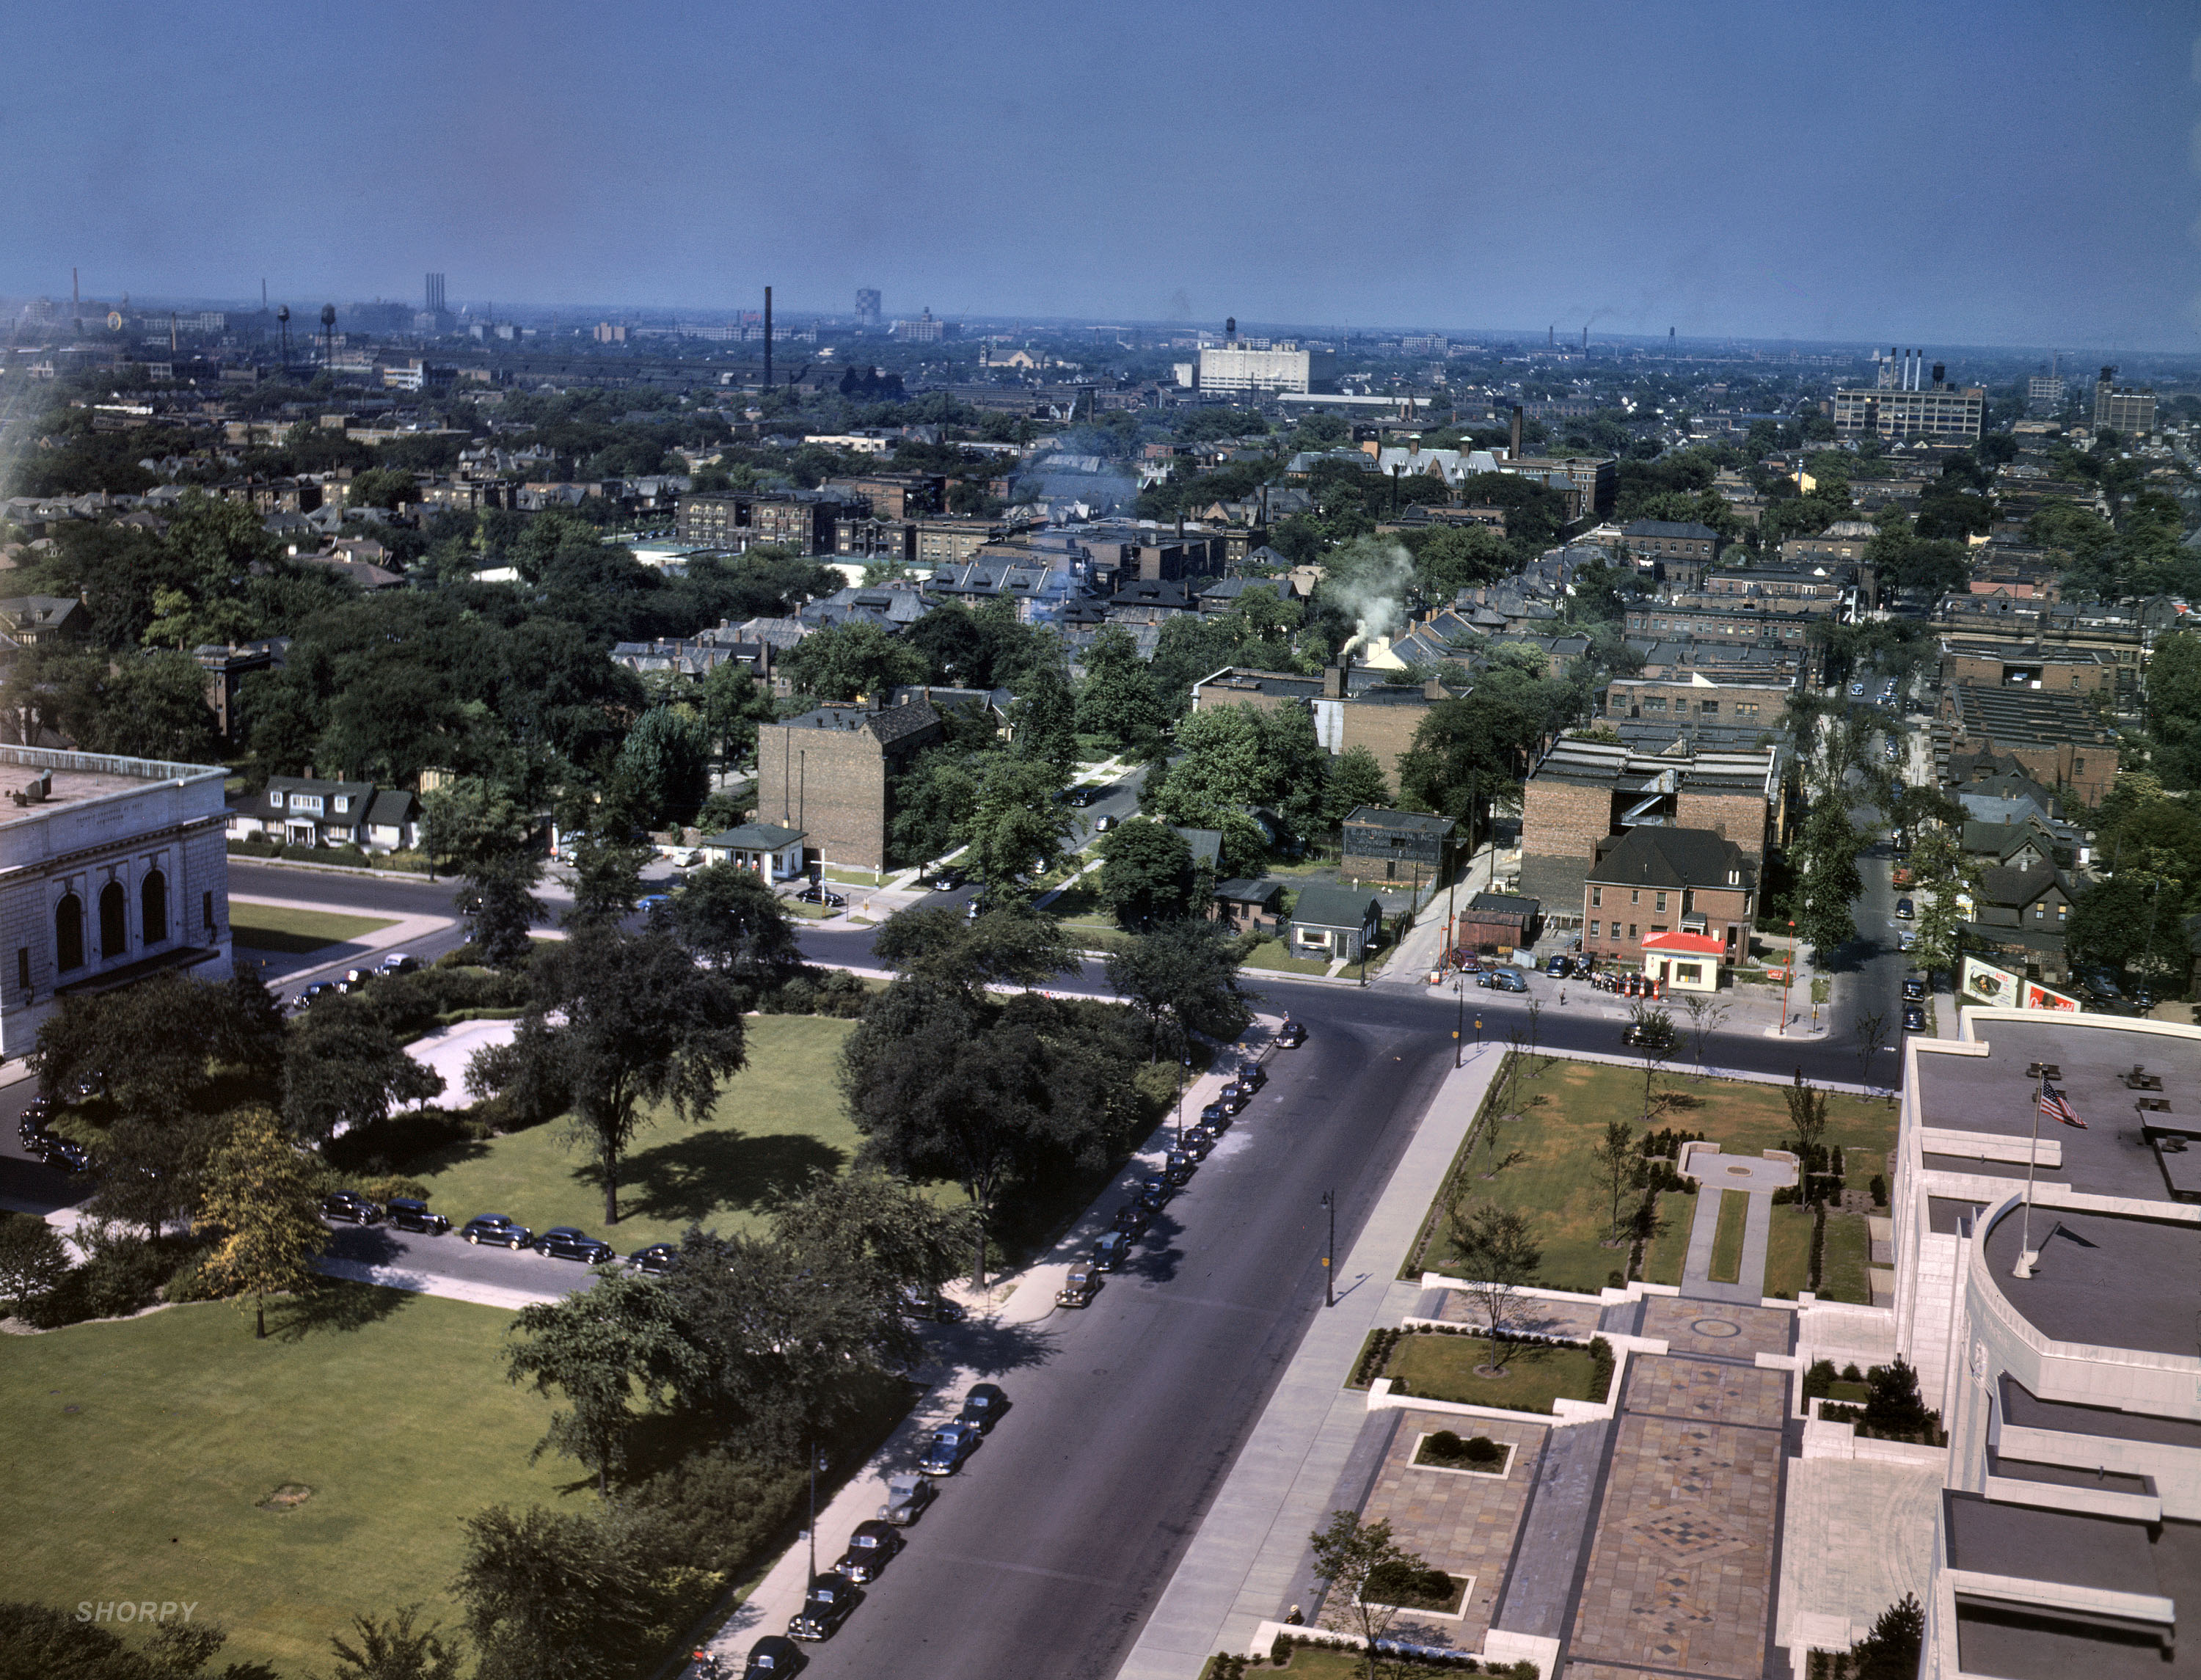 Detroit, July 1942. "Looking east on Farnsworth Street with the Rackham Memorial Building at right and Detroit Institute of Art on the left." 4x5 Kodachrome transparency by Arthur Siegel. View full size.